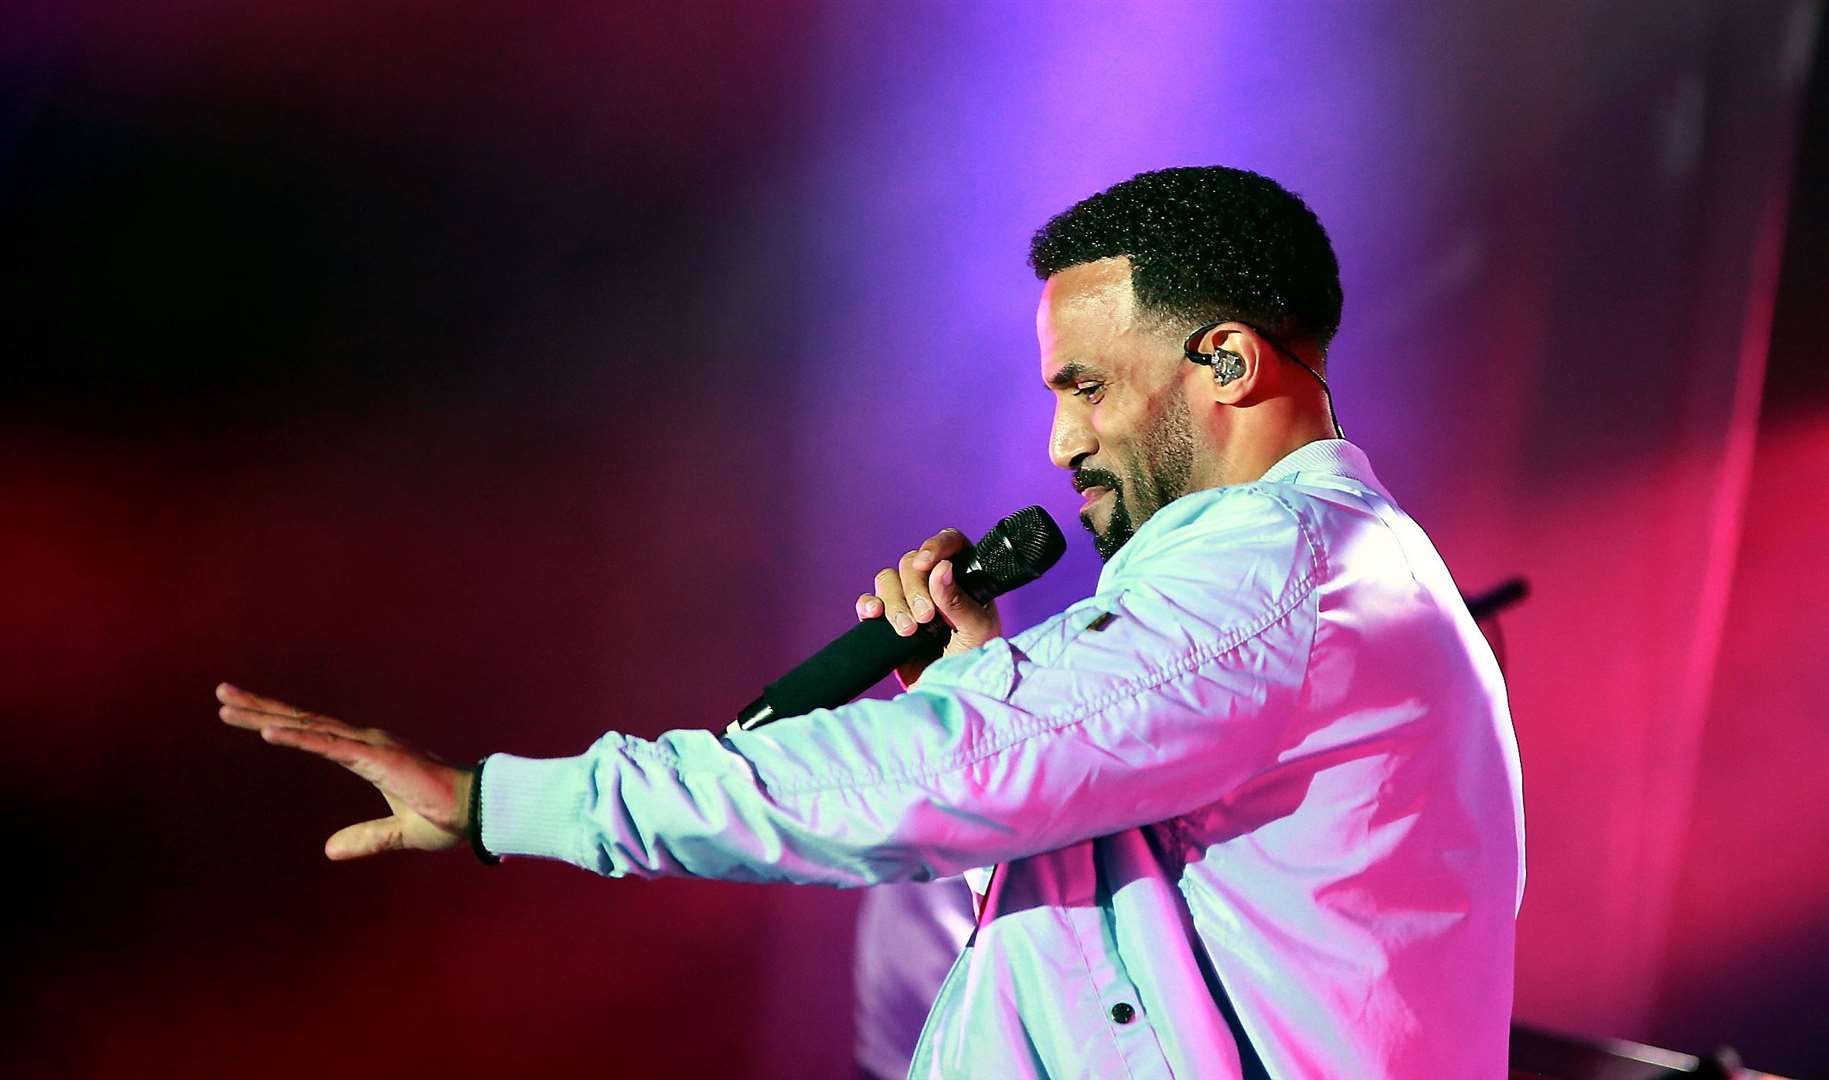 Craig David sold out Rochester Castle Concerts in 2017, but only managed to sell 2,606 tickets this year